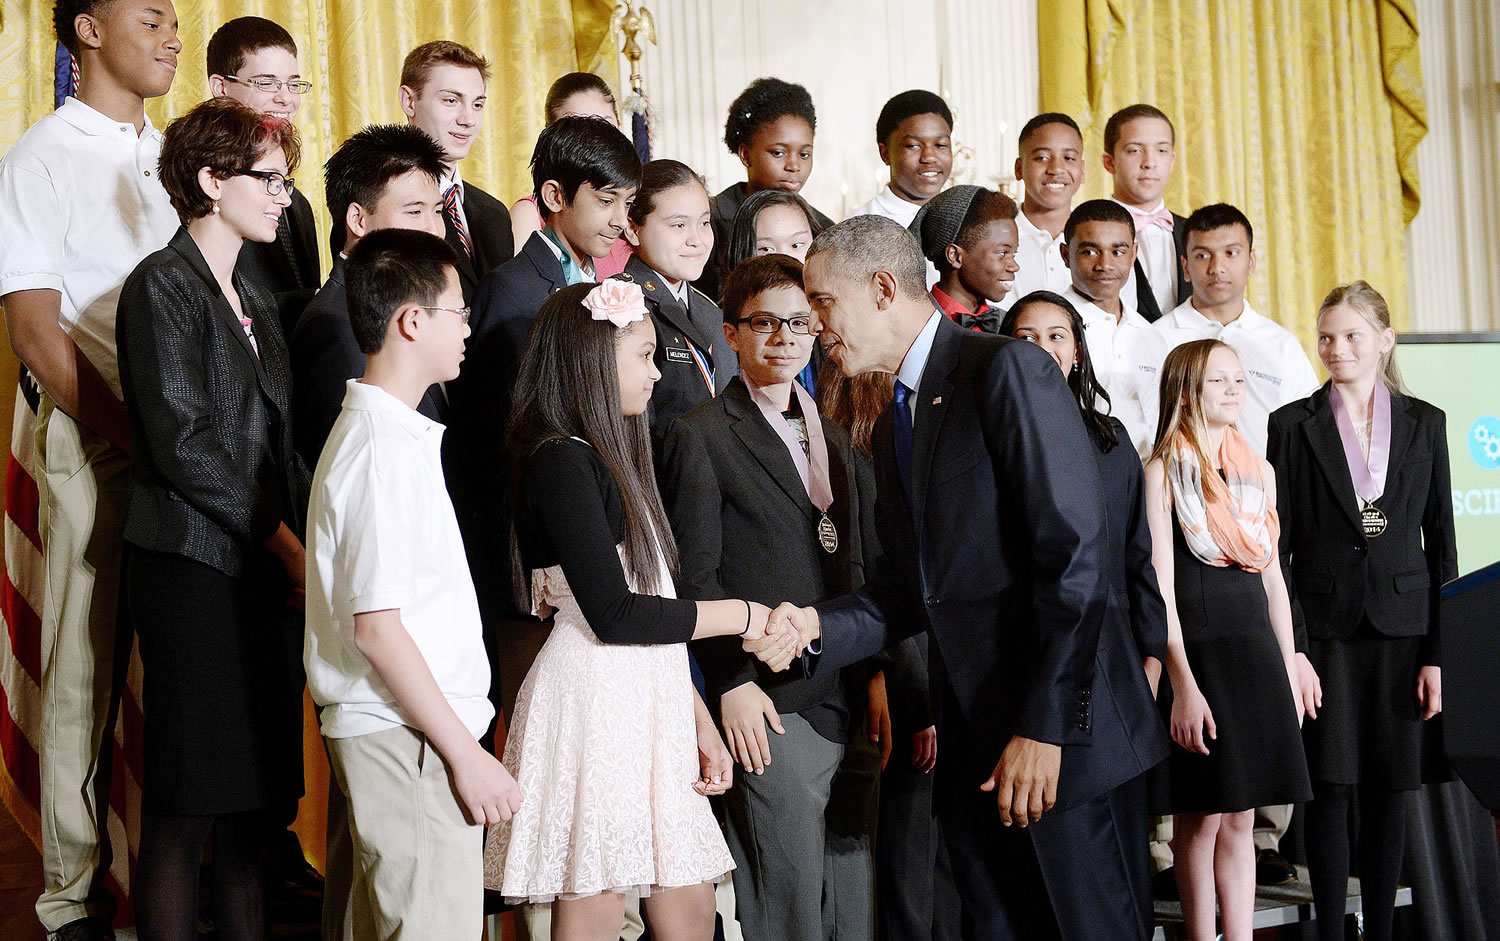 President Barack Obama shakes hands with student winners of a broad range of science, technology, engineering, and math competitions from across the country in the East Room of the White House.